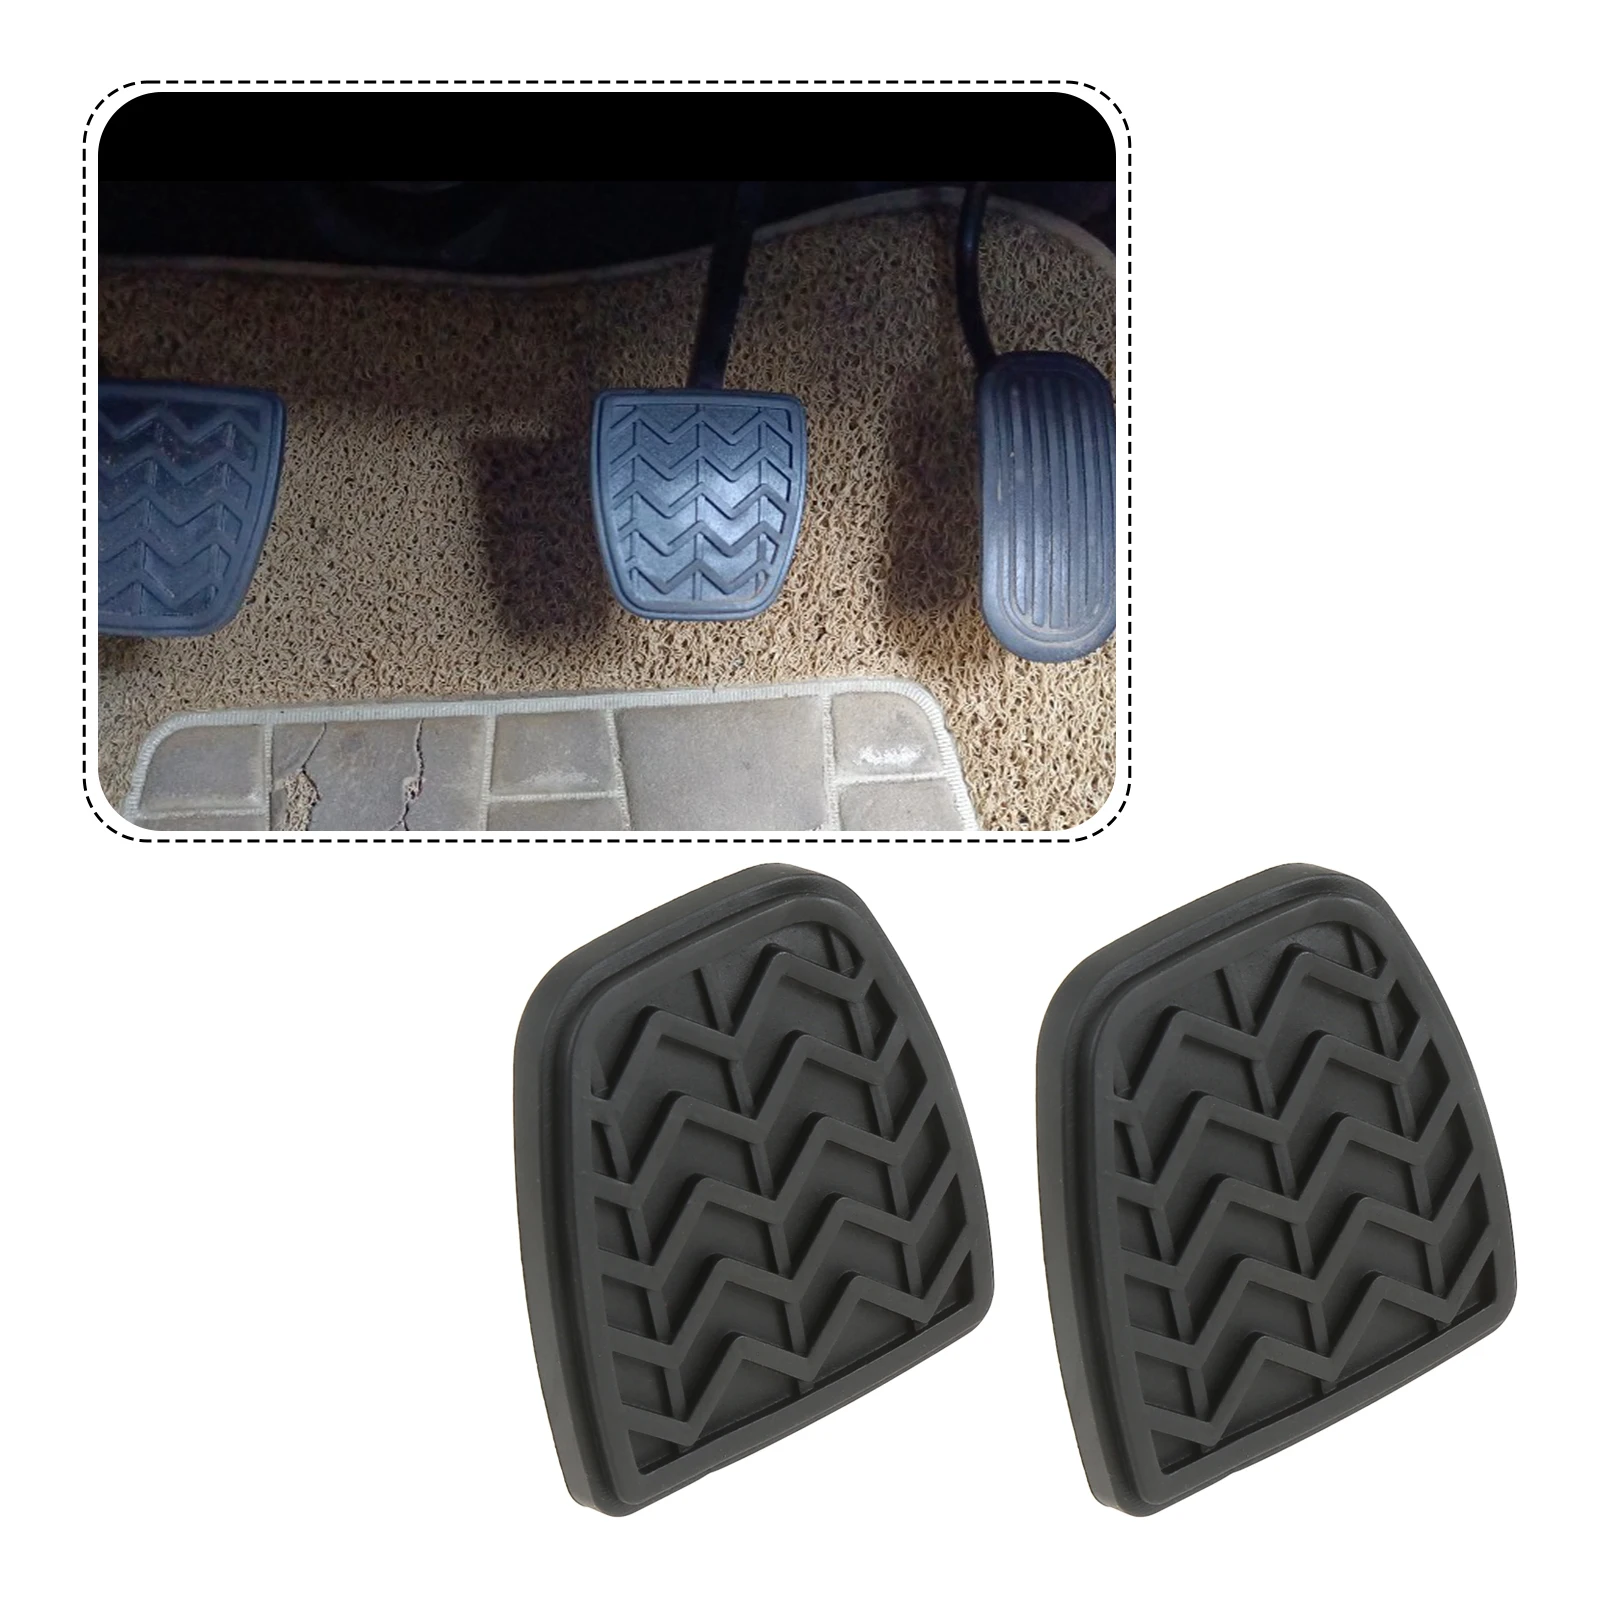 2Pcs Black Rubber Brake Clutch Pedal Pad Cover for Haval H6/M4 Toyota - £6.35 GBP